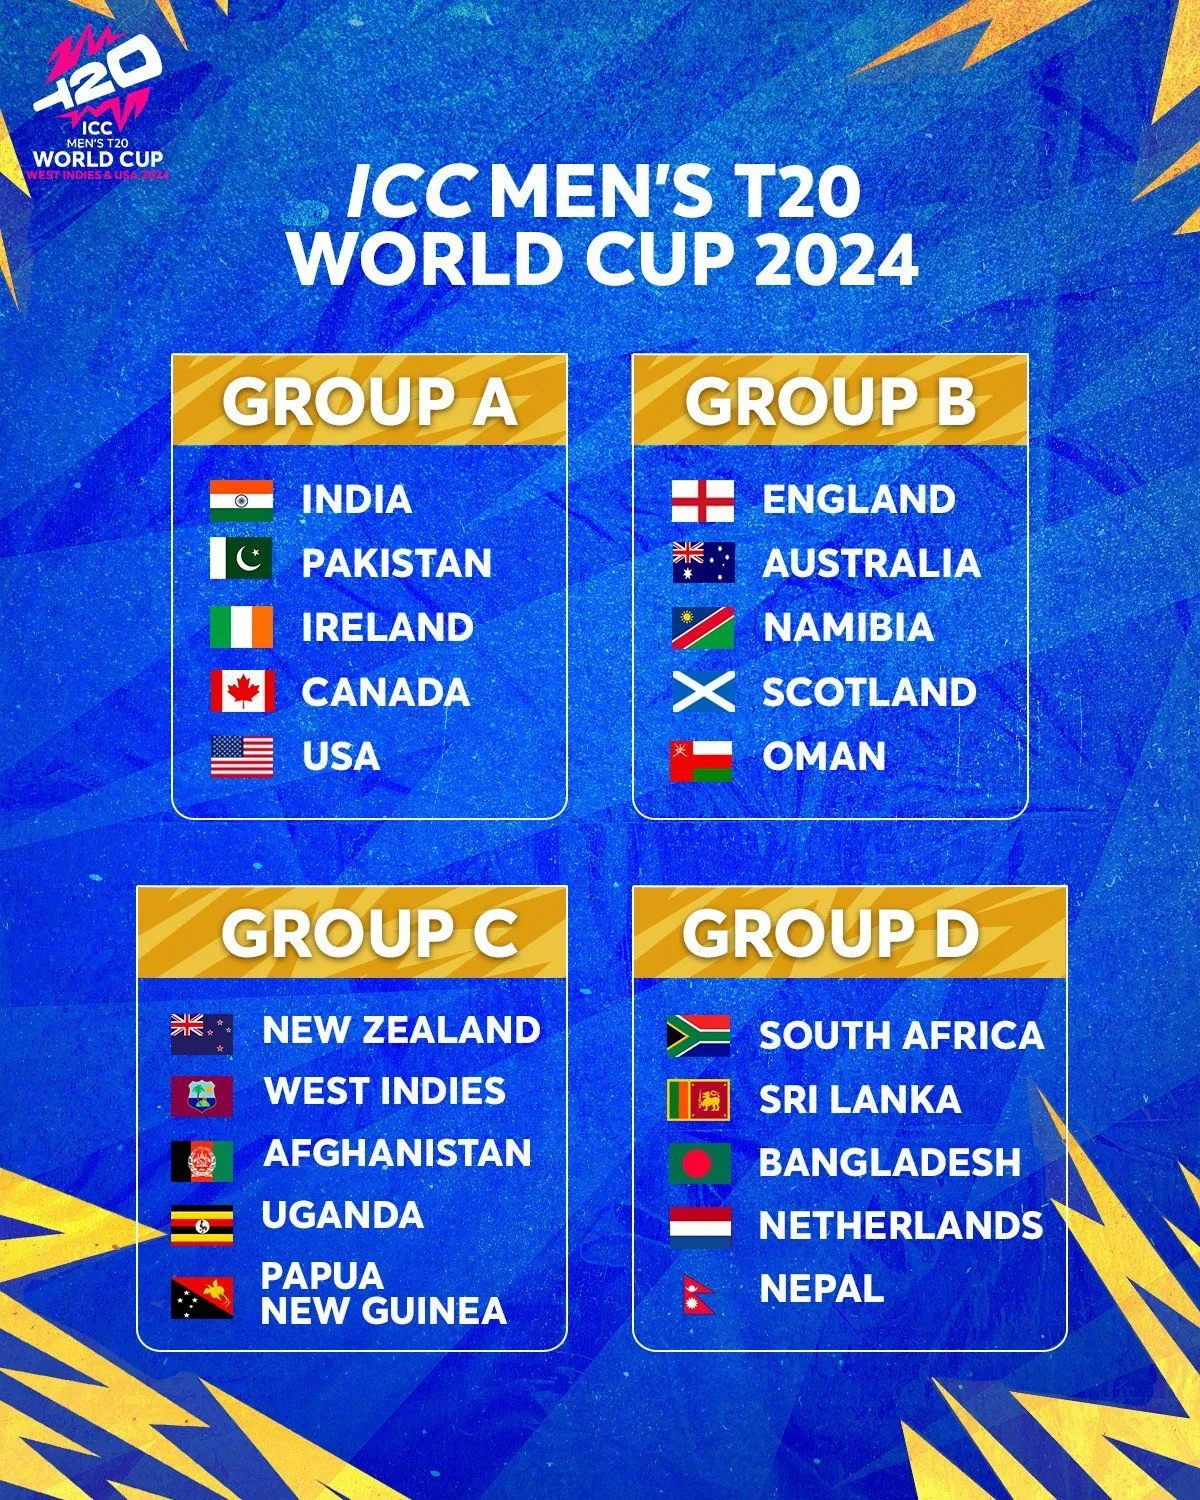 teams included in T20 World Cup 2024